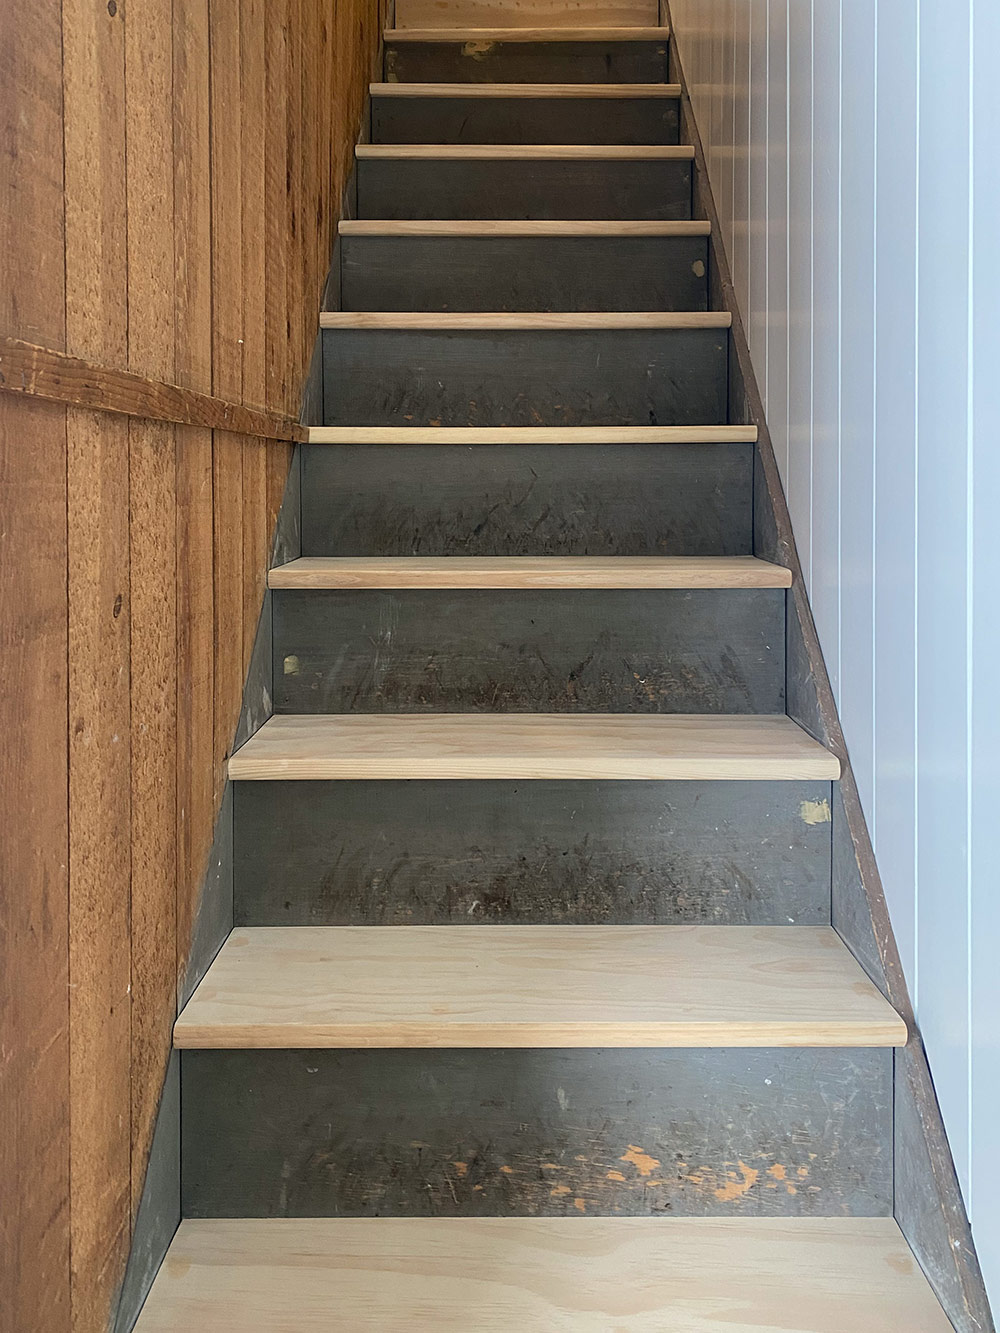 Staircase with new wooden treads.